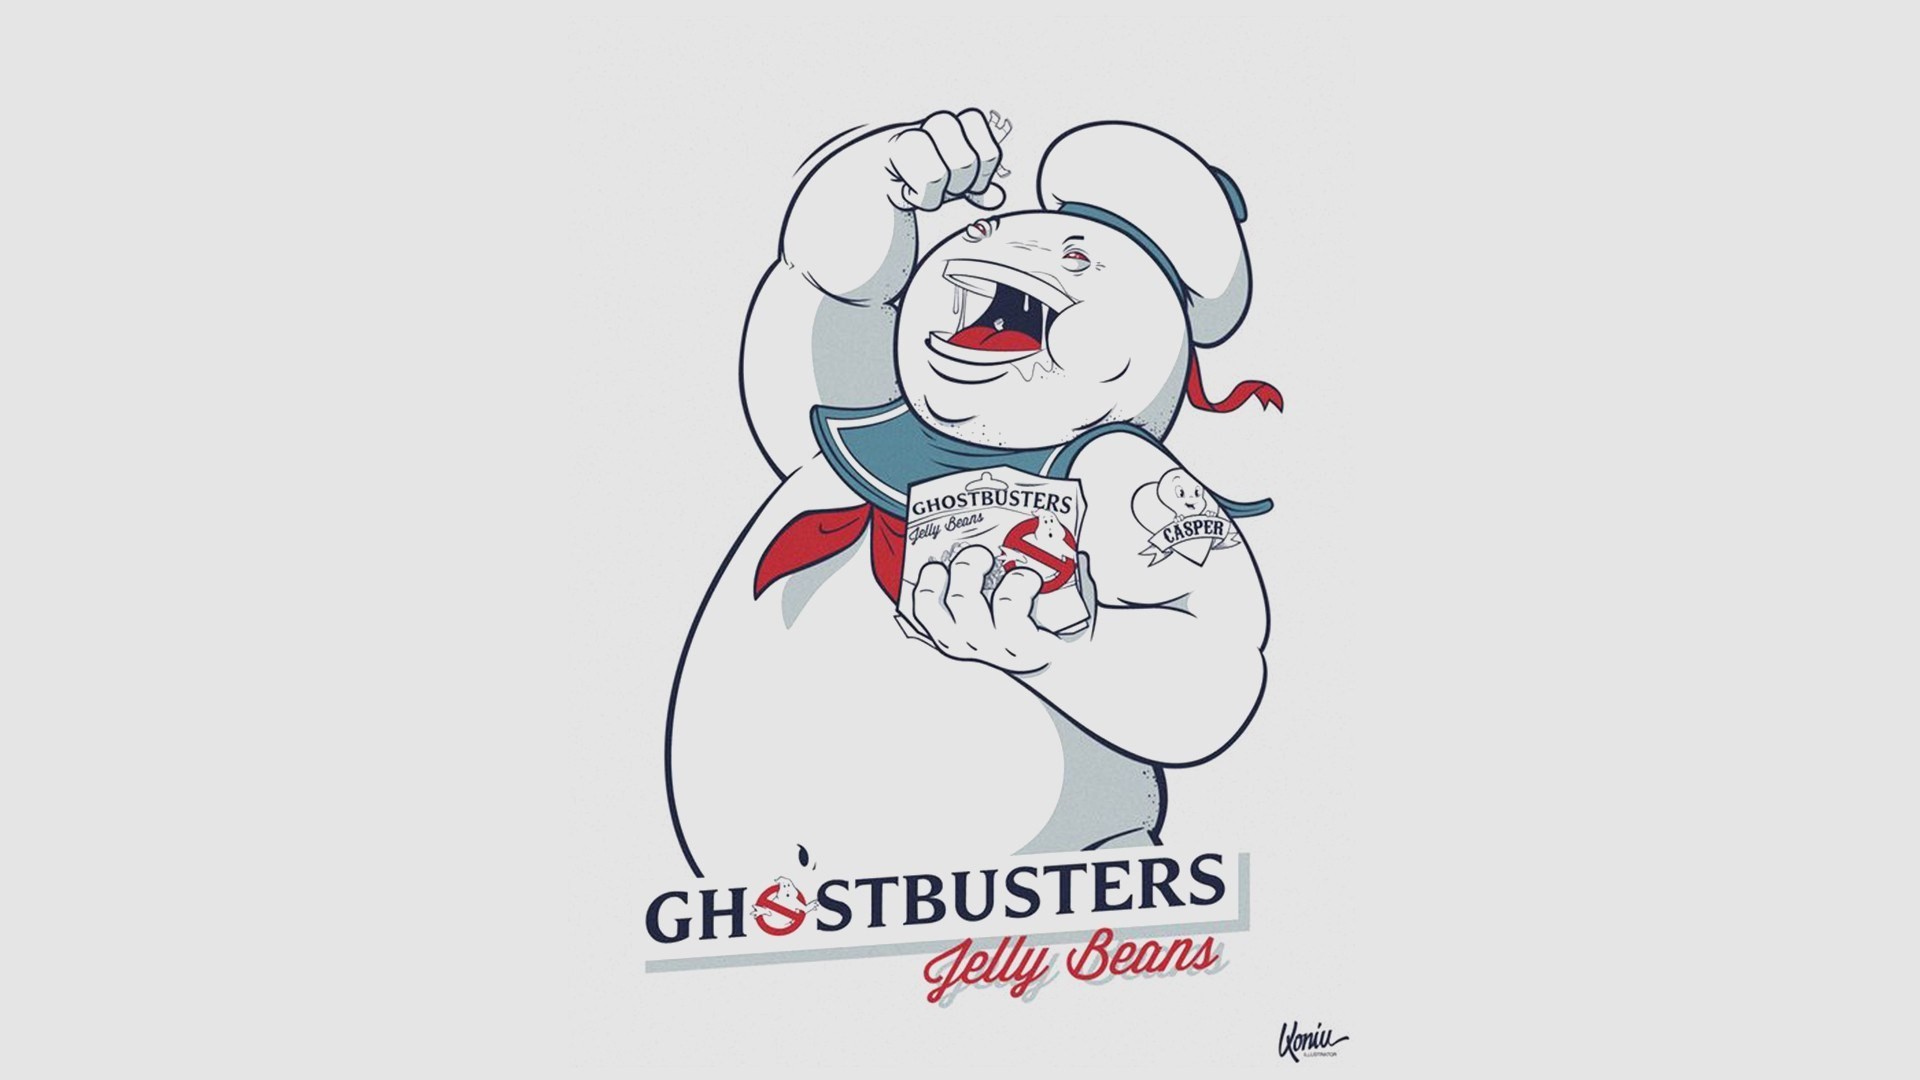 1920x1080 high resolution wallpapers widescreen ghostbusters, 132 kB - Osvald Robin